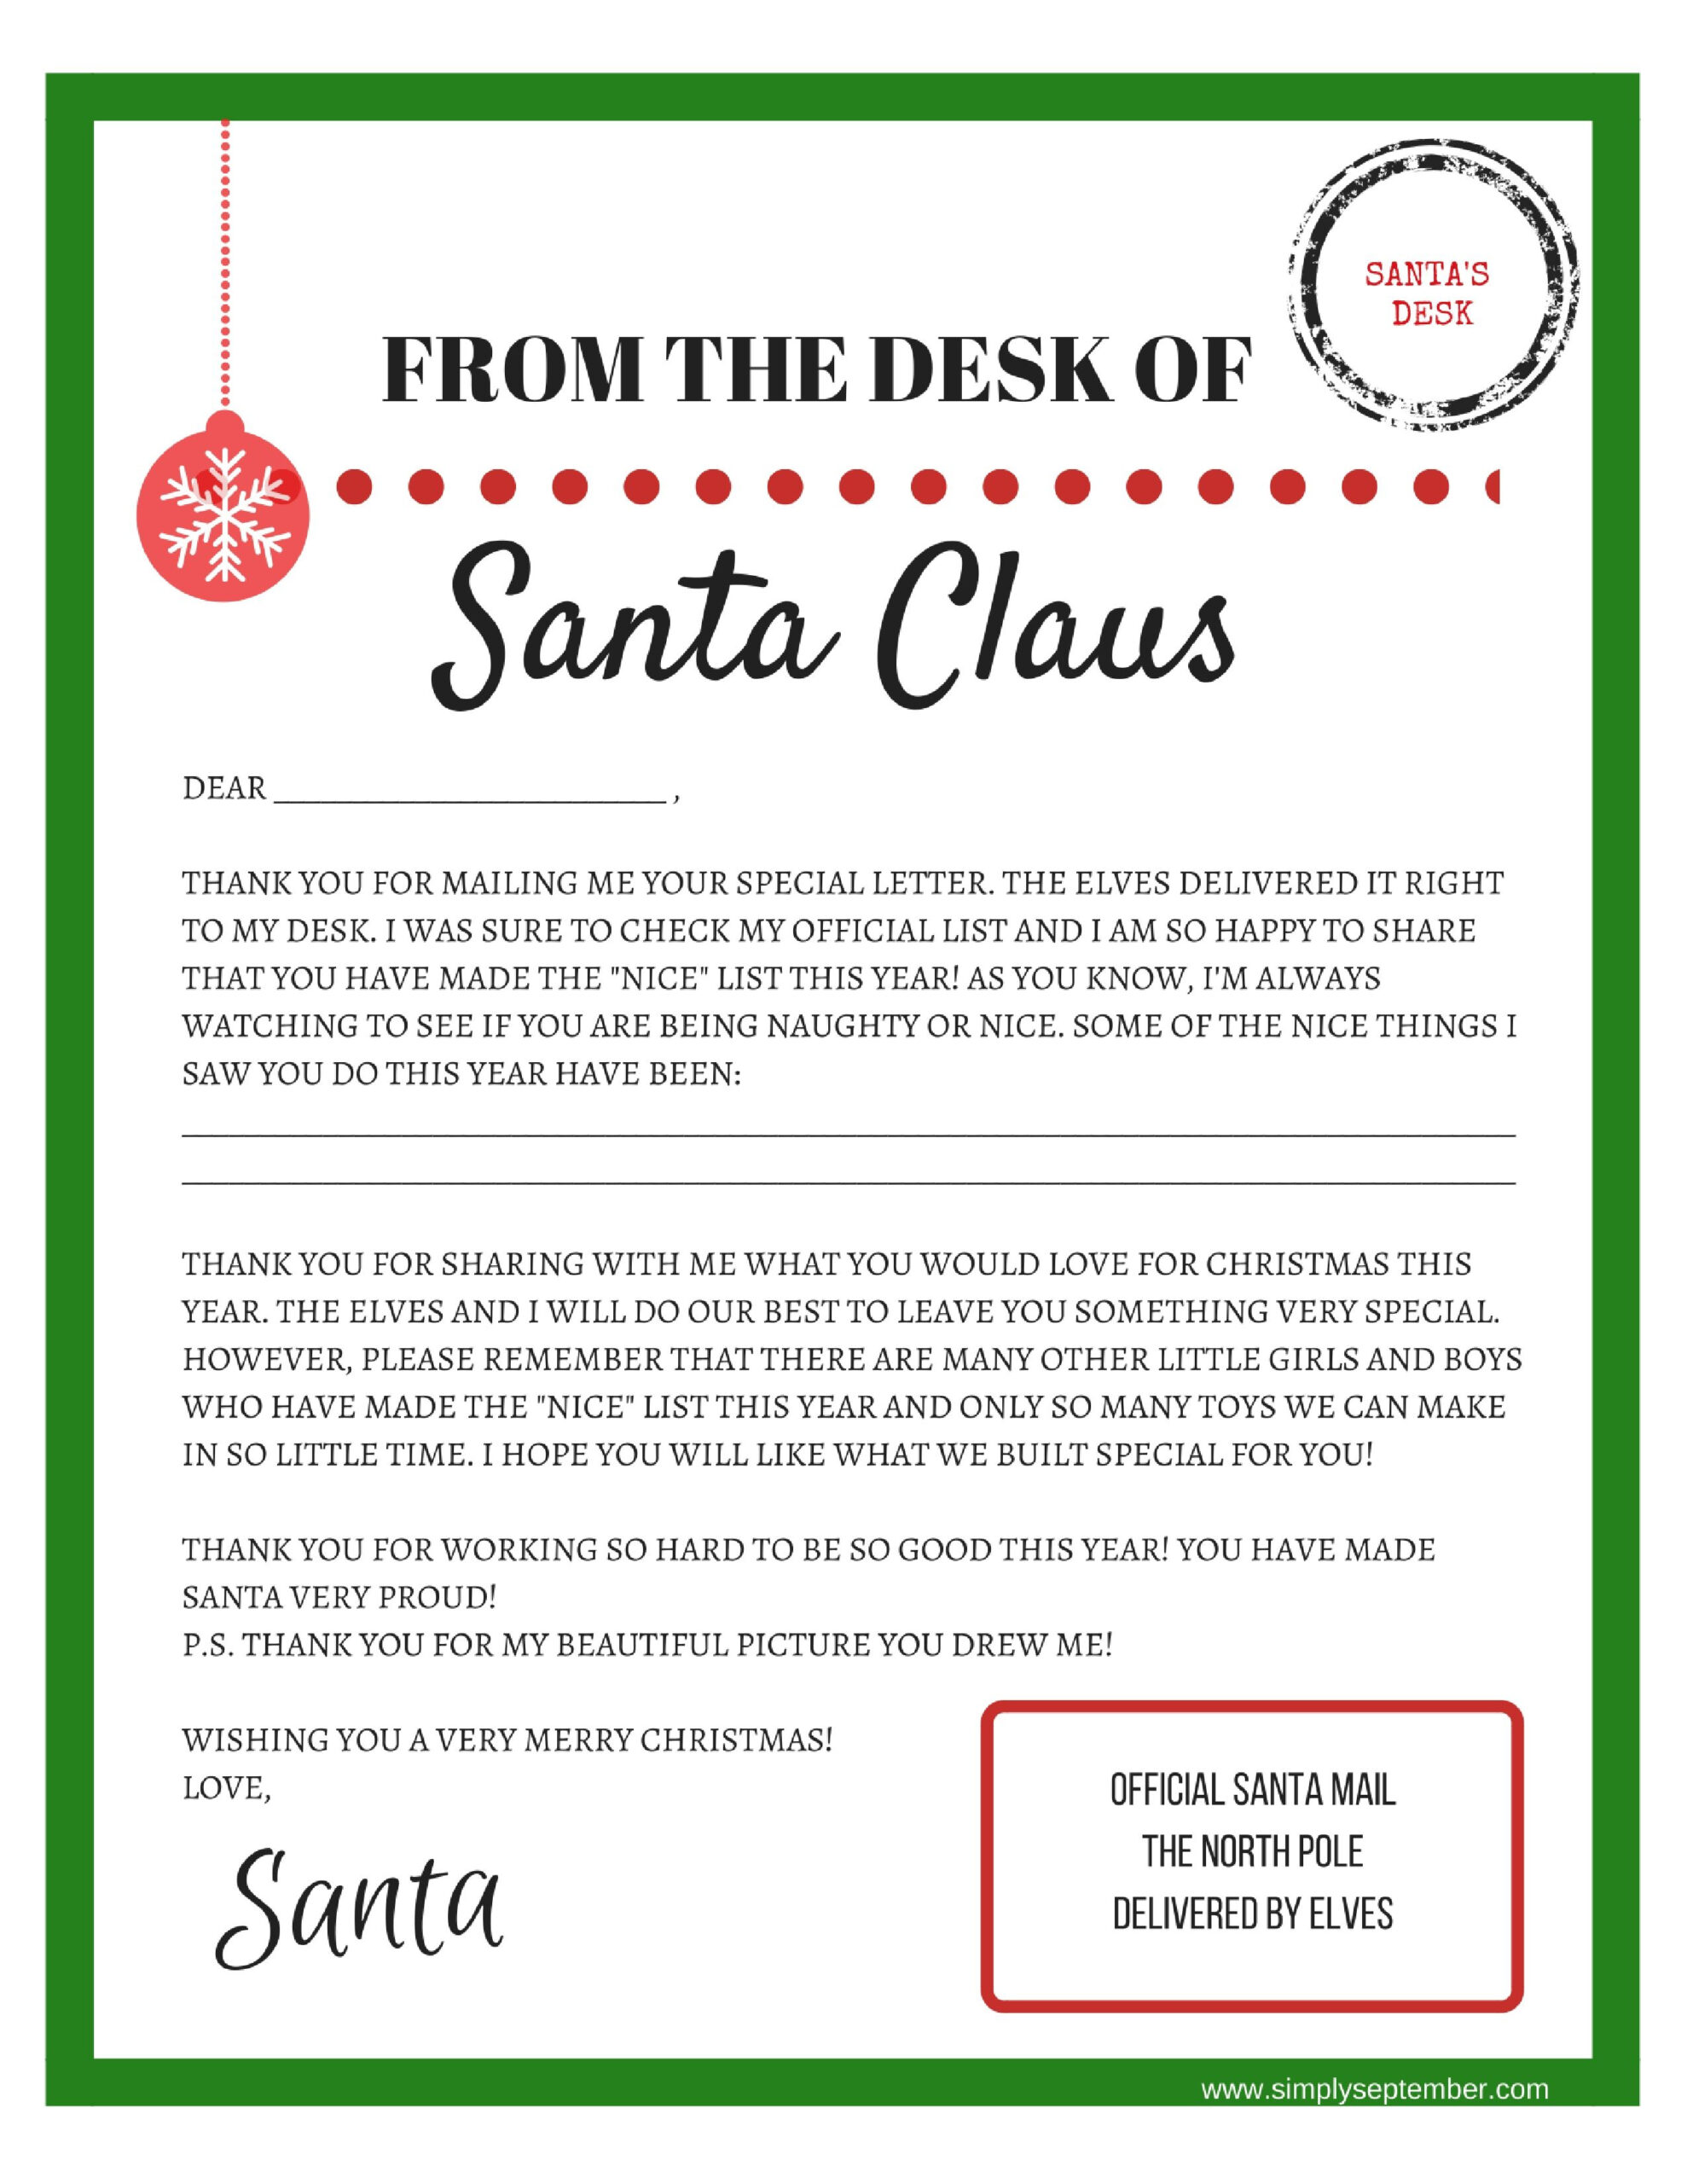 Letters To And From Santa: Free Printables - Simply September regarding Free Printable Letters From Santa Claus